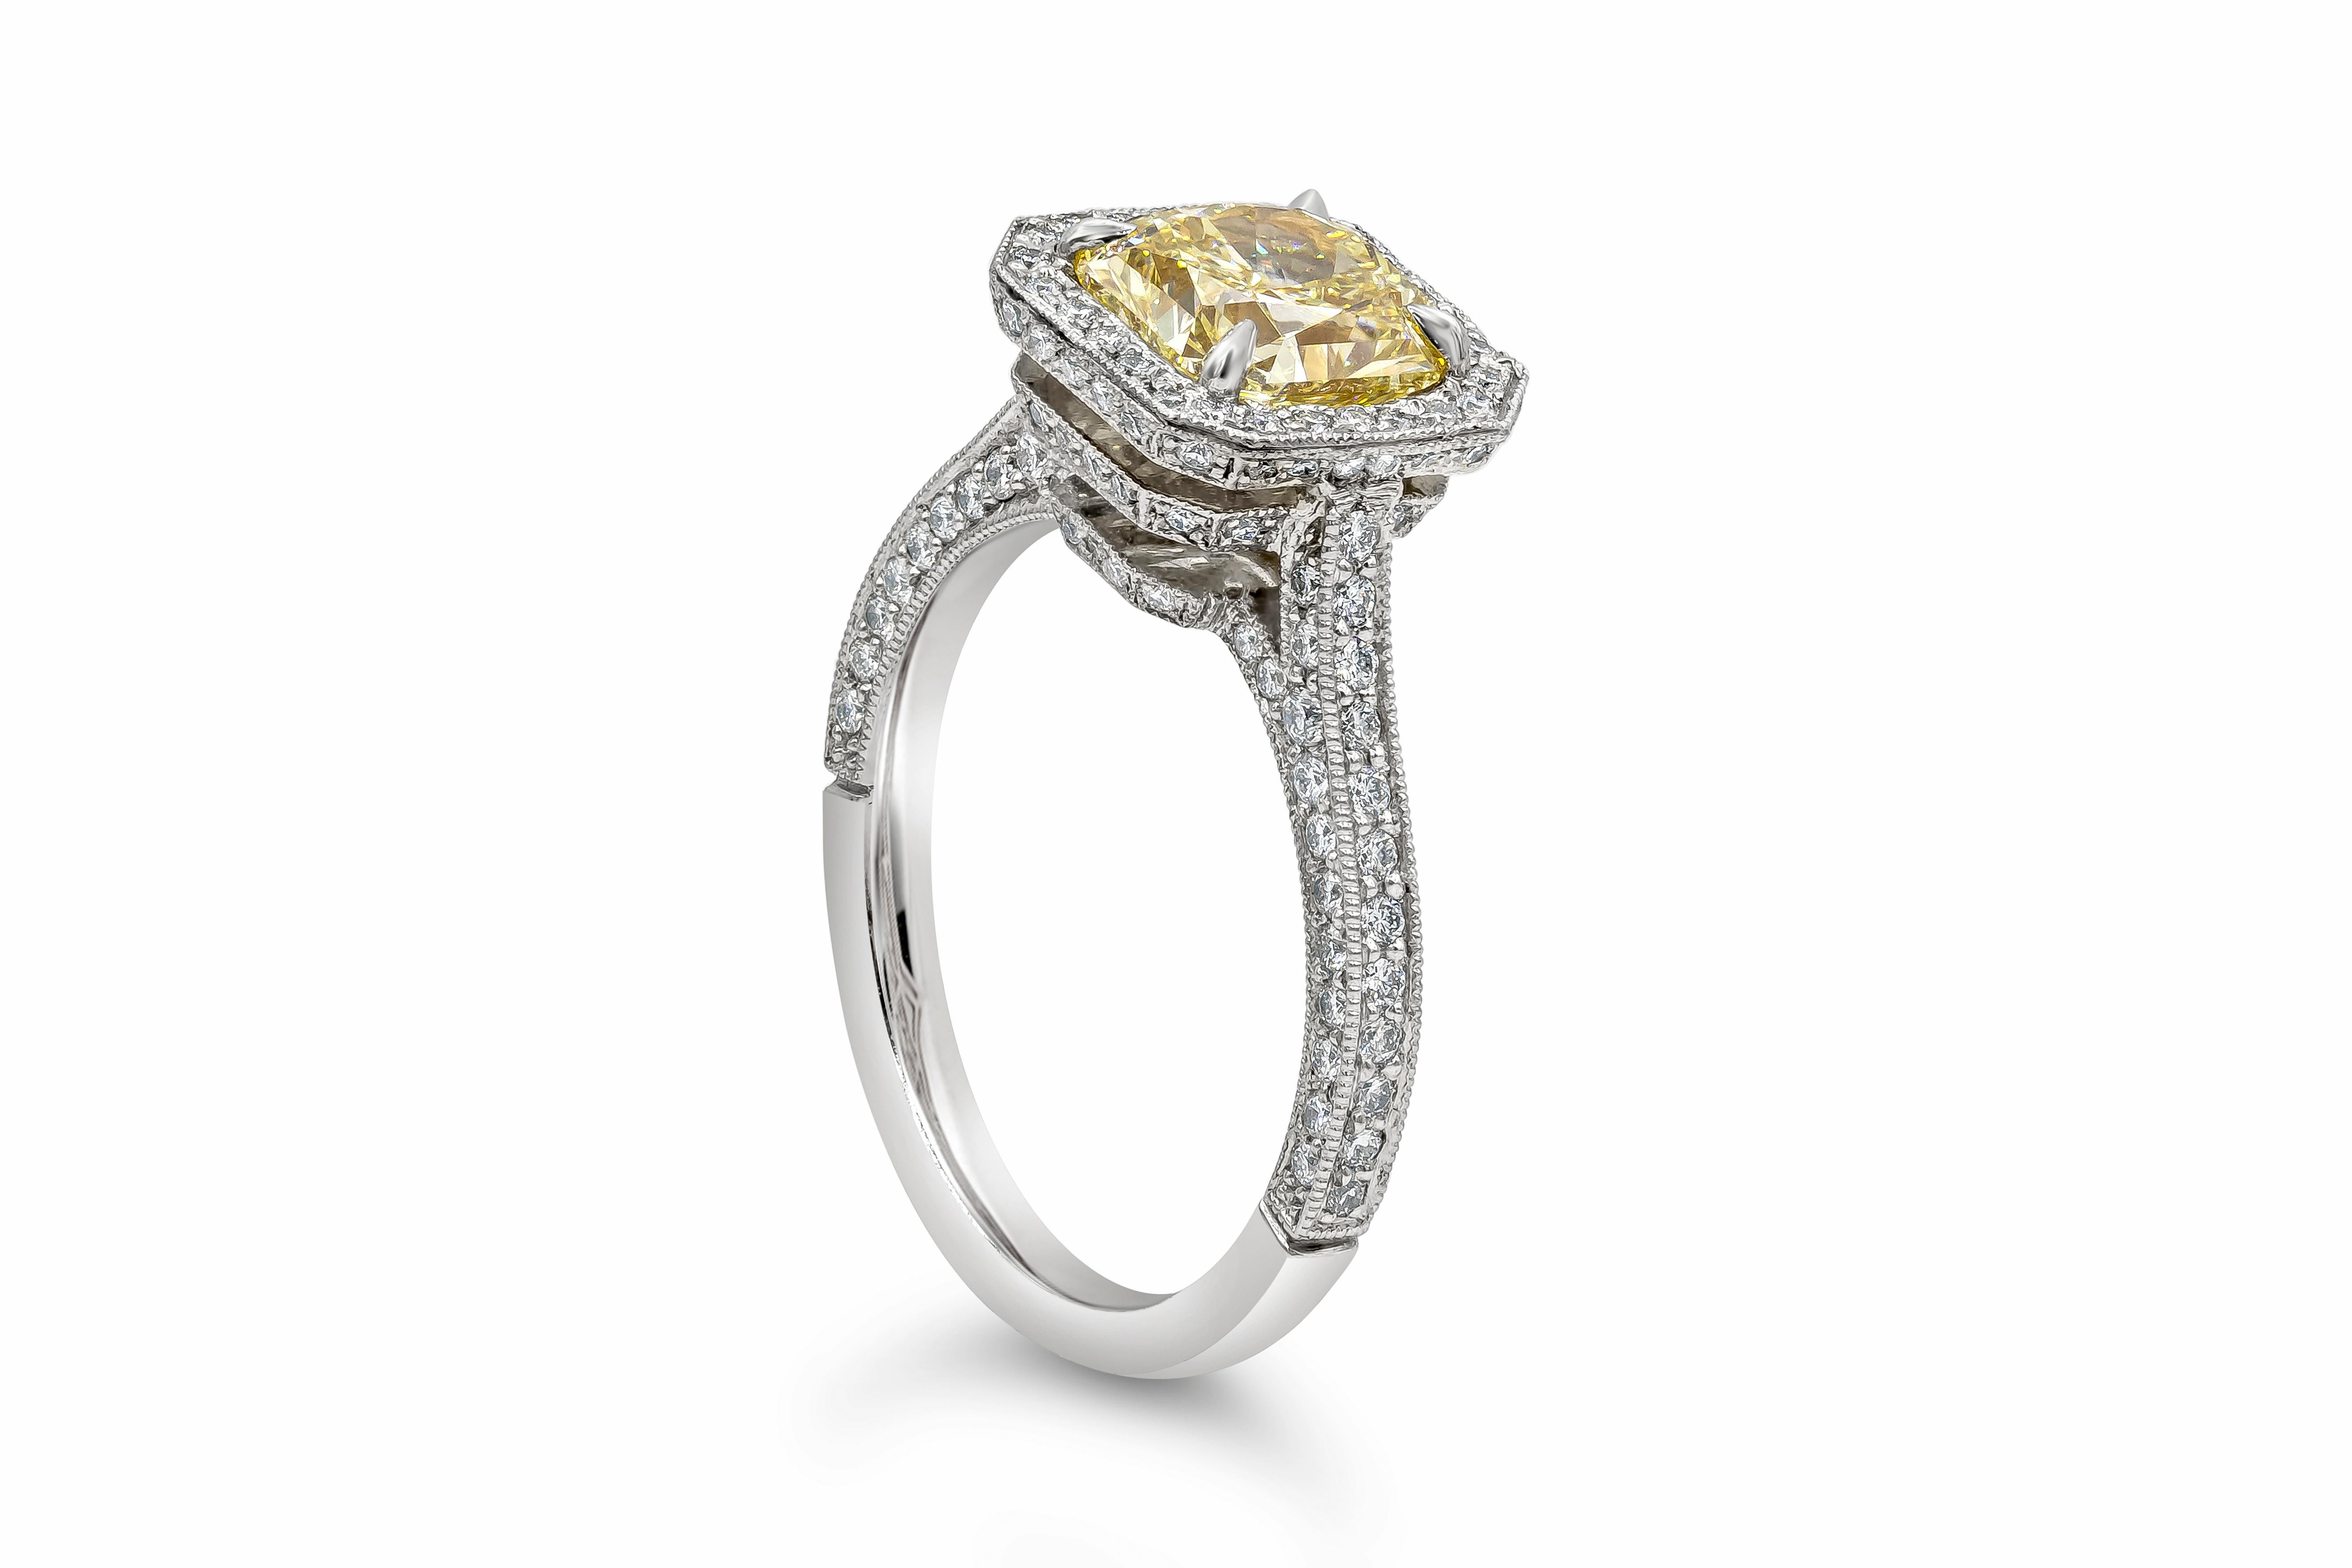 A vintage-style engagement ring showcasing a 1.76 carat radiant cut yellow diamond certified by GIA as Fancy Brownish Yellow color, VS1 clarity, set in a brilliant diamond four prong bezel set halo style. Polished platinum mounting accented with